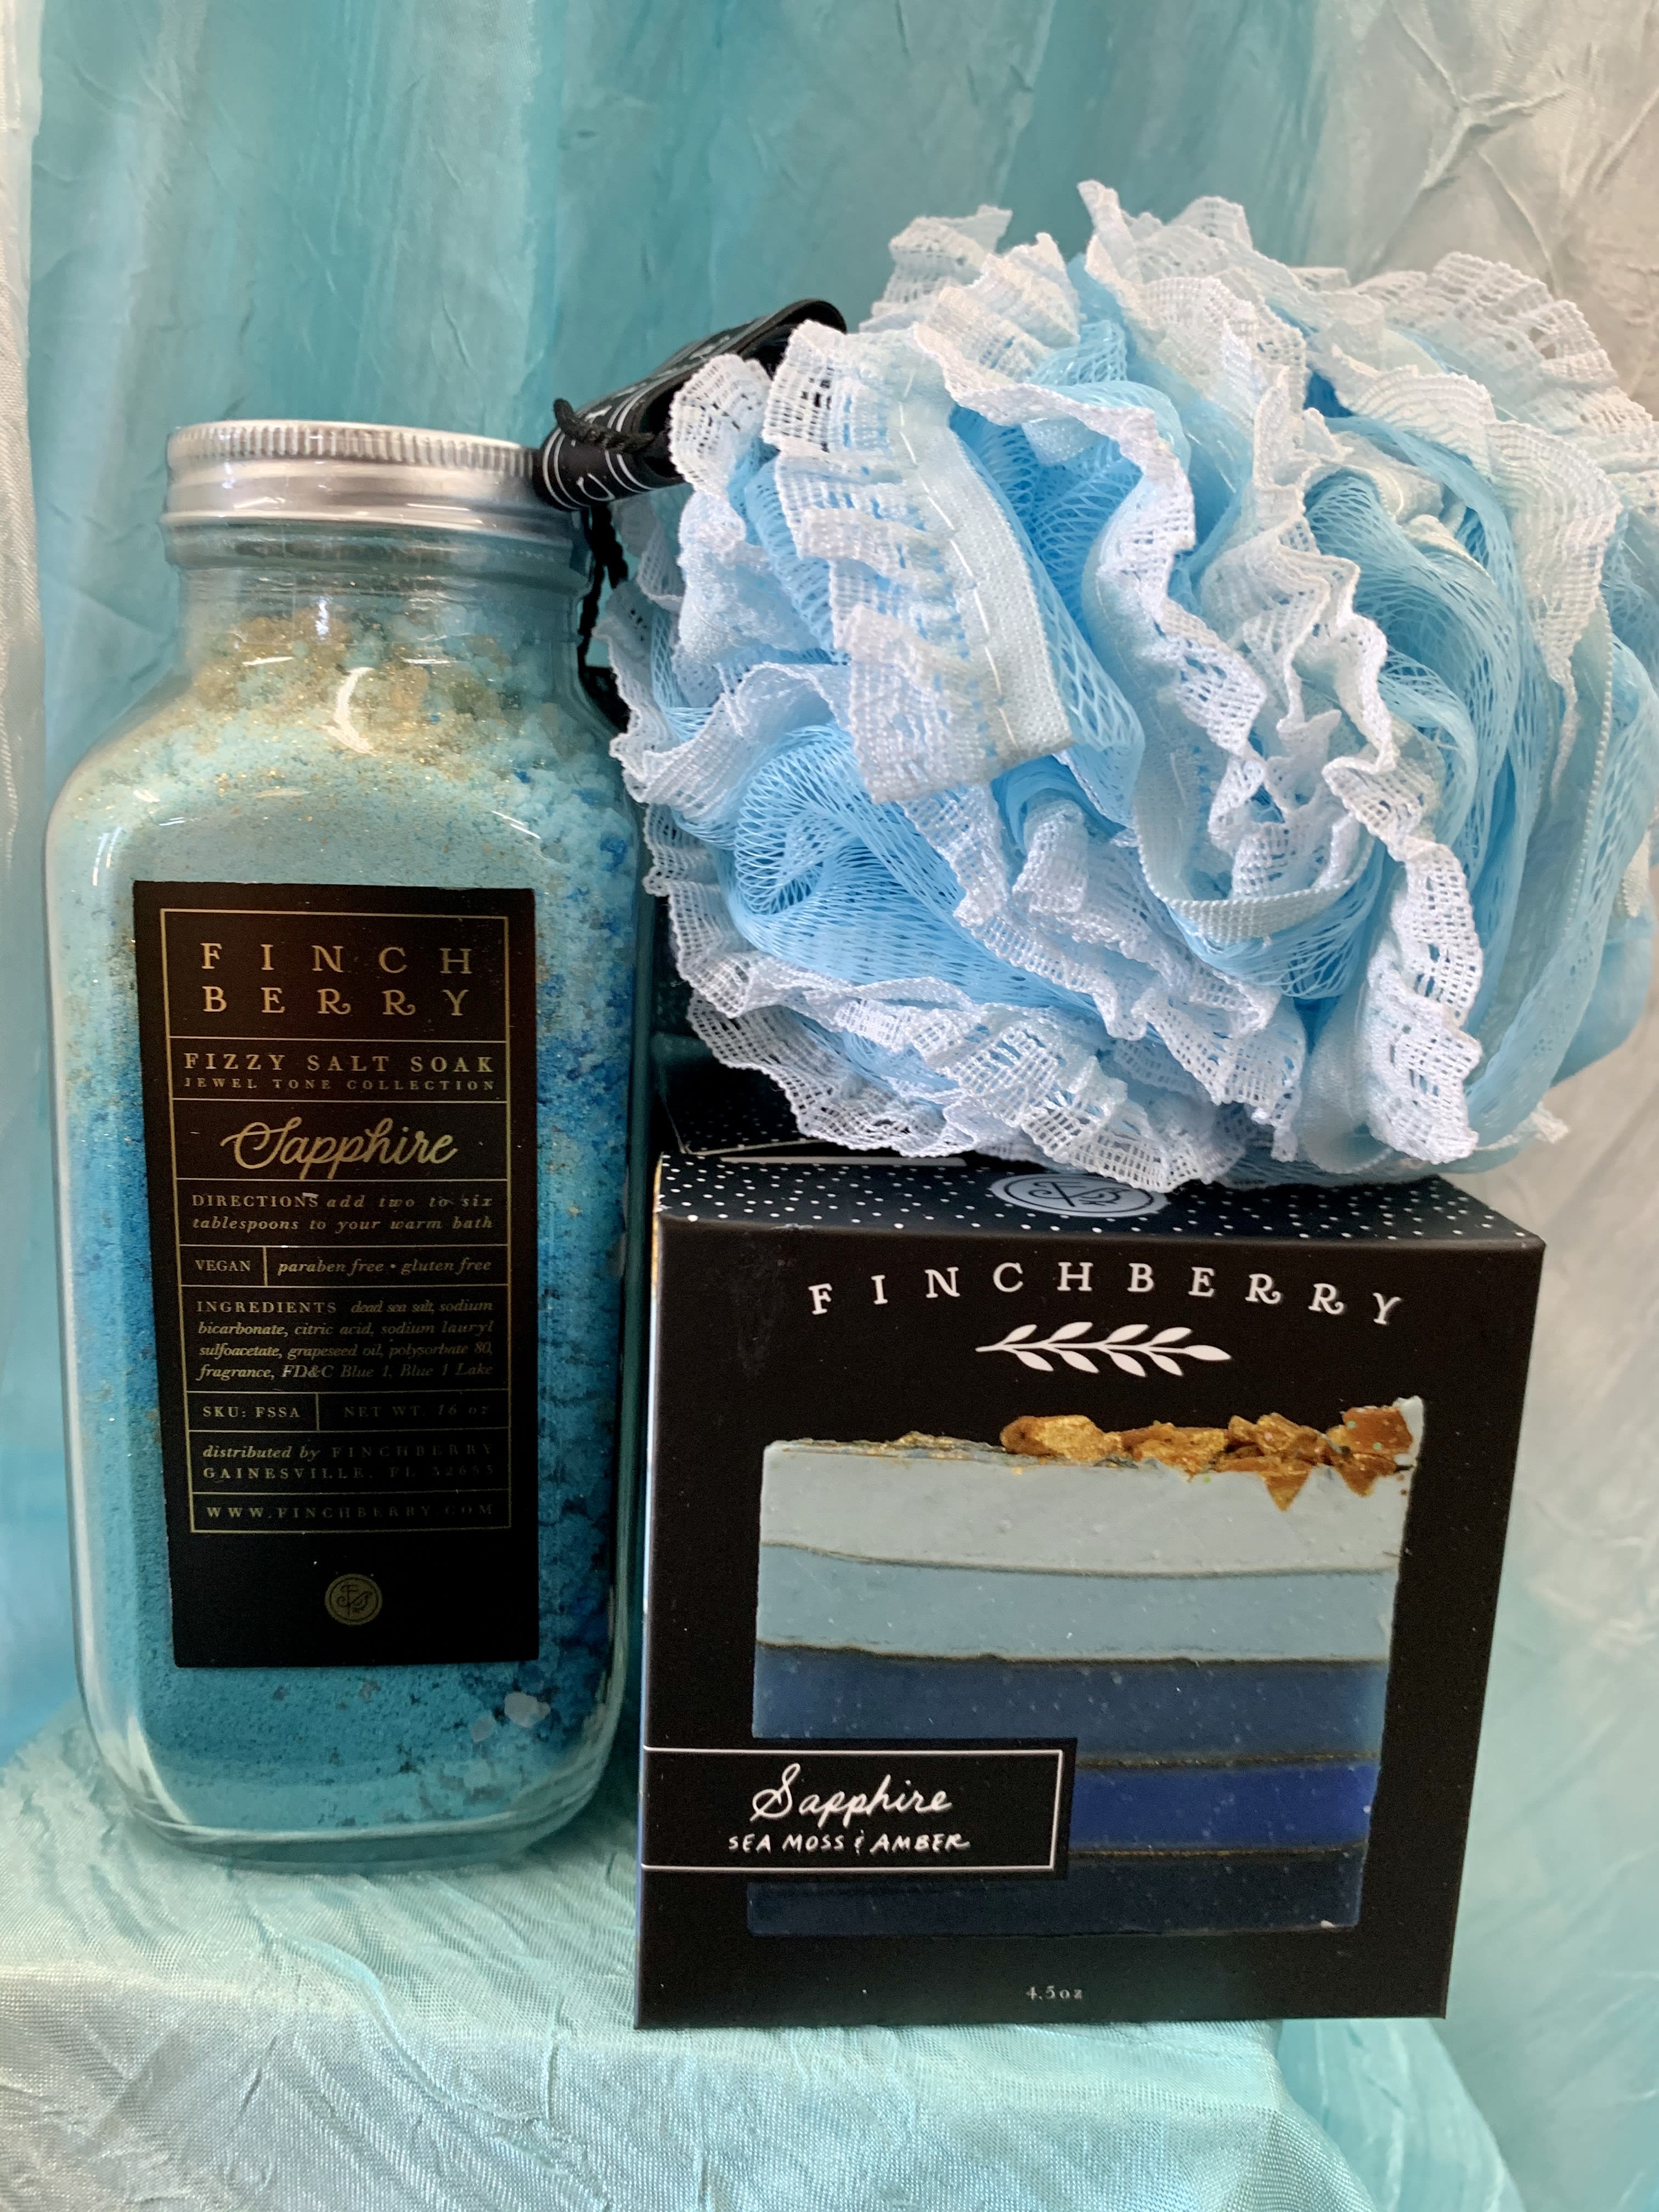 Sapphire gift set - Finchberry - Sapphire harnesses the exhilaration of a coastal sea spray infused with the rich scent of warm amber to craft the tranquil moment you deserve. This scent transcends your traditional cleaning routine and allows the cascading blue colors of the soap to provide the ultimate self-care experience. This gift set includes Fizzy Salt Soak, Bar soap, and Loofah Sponge.